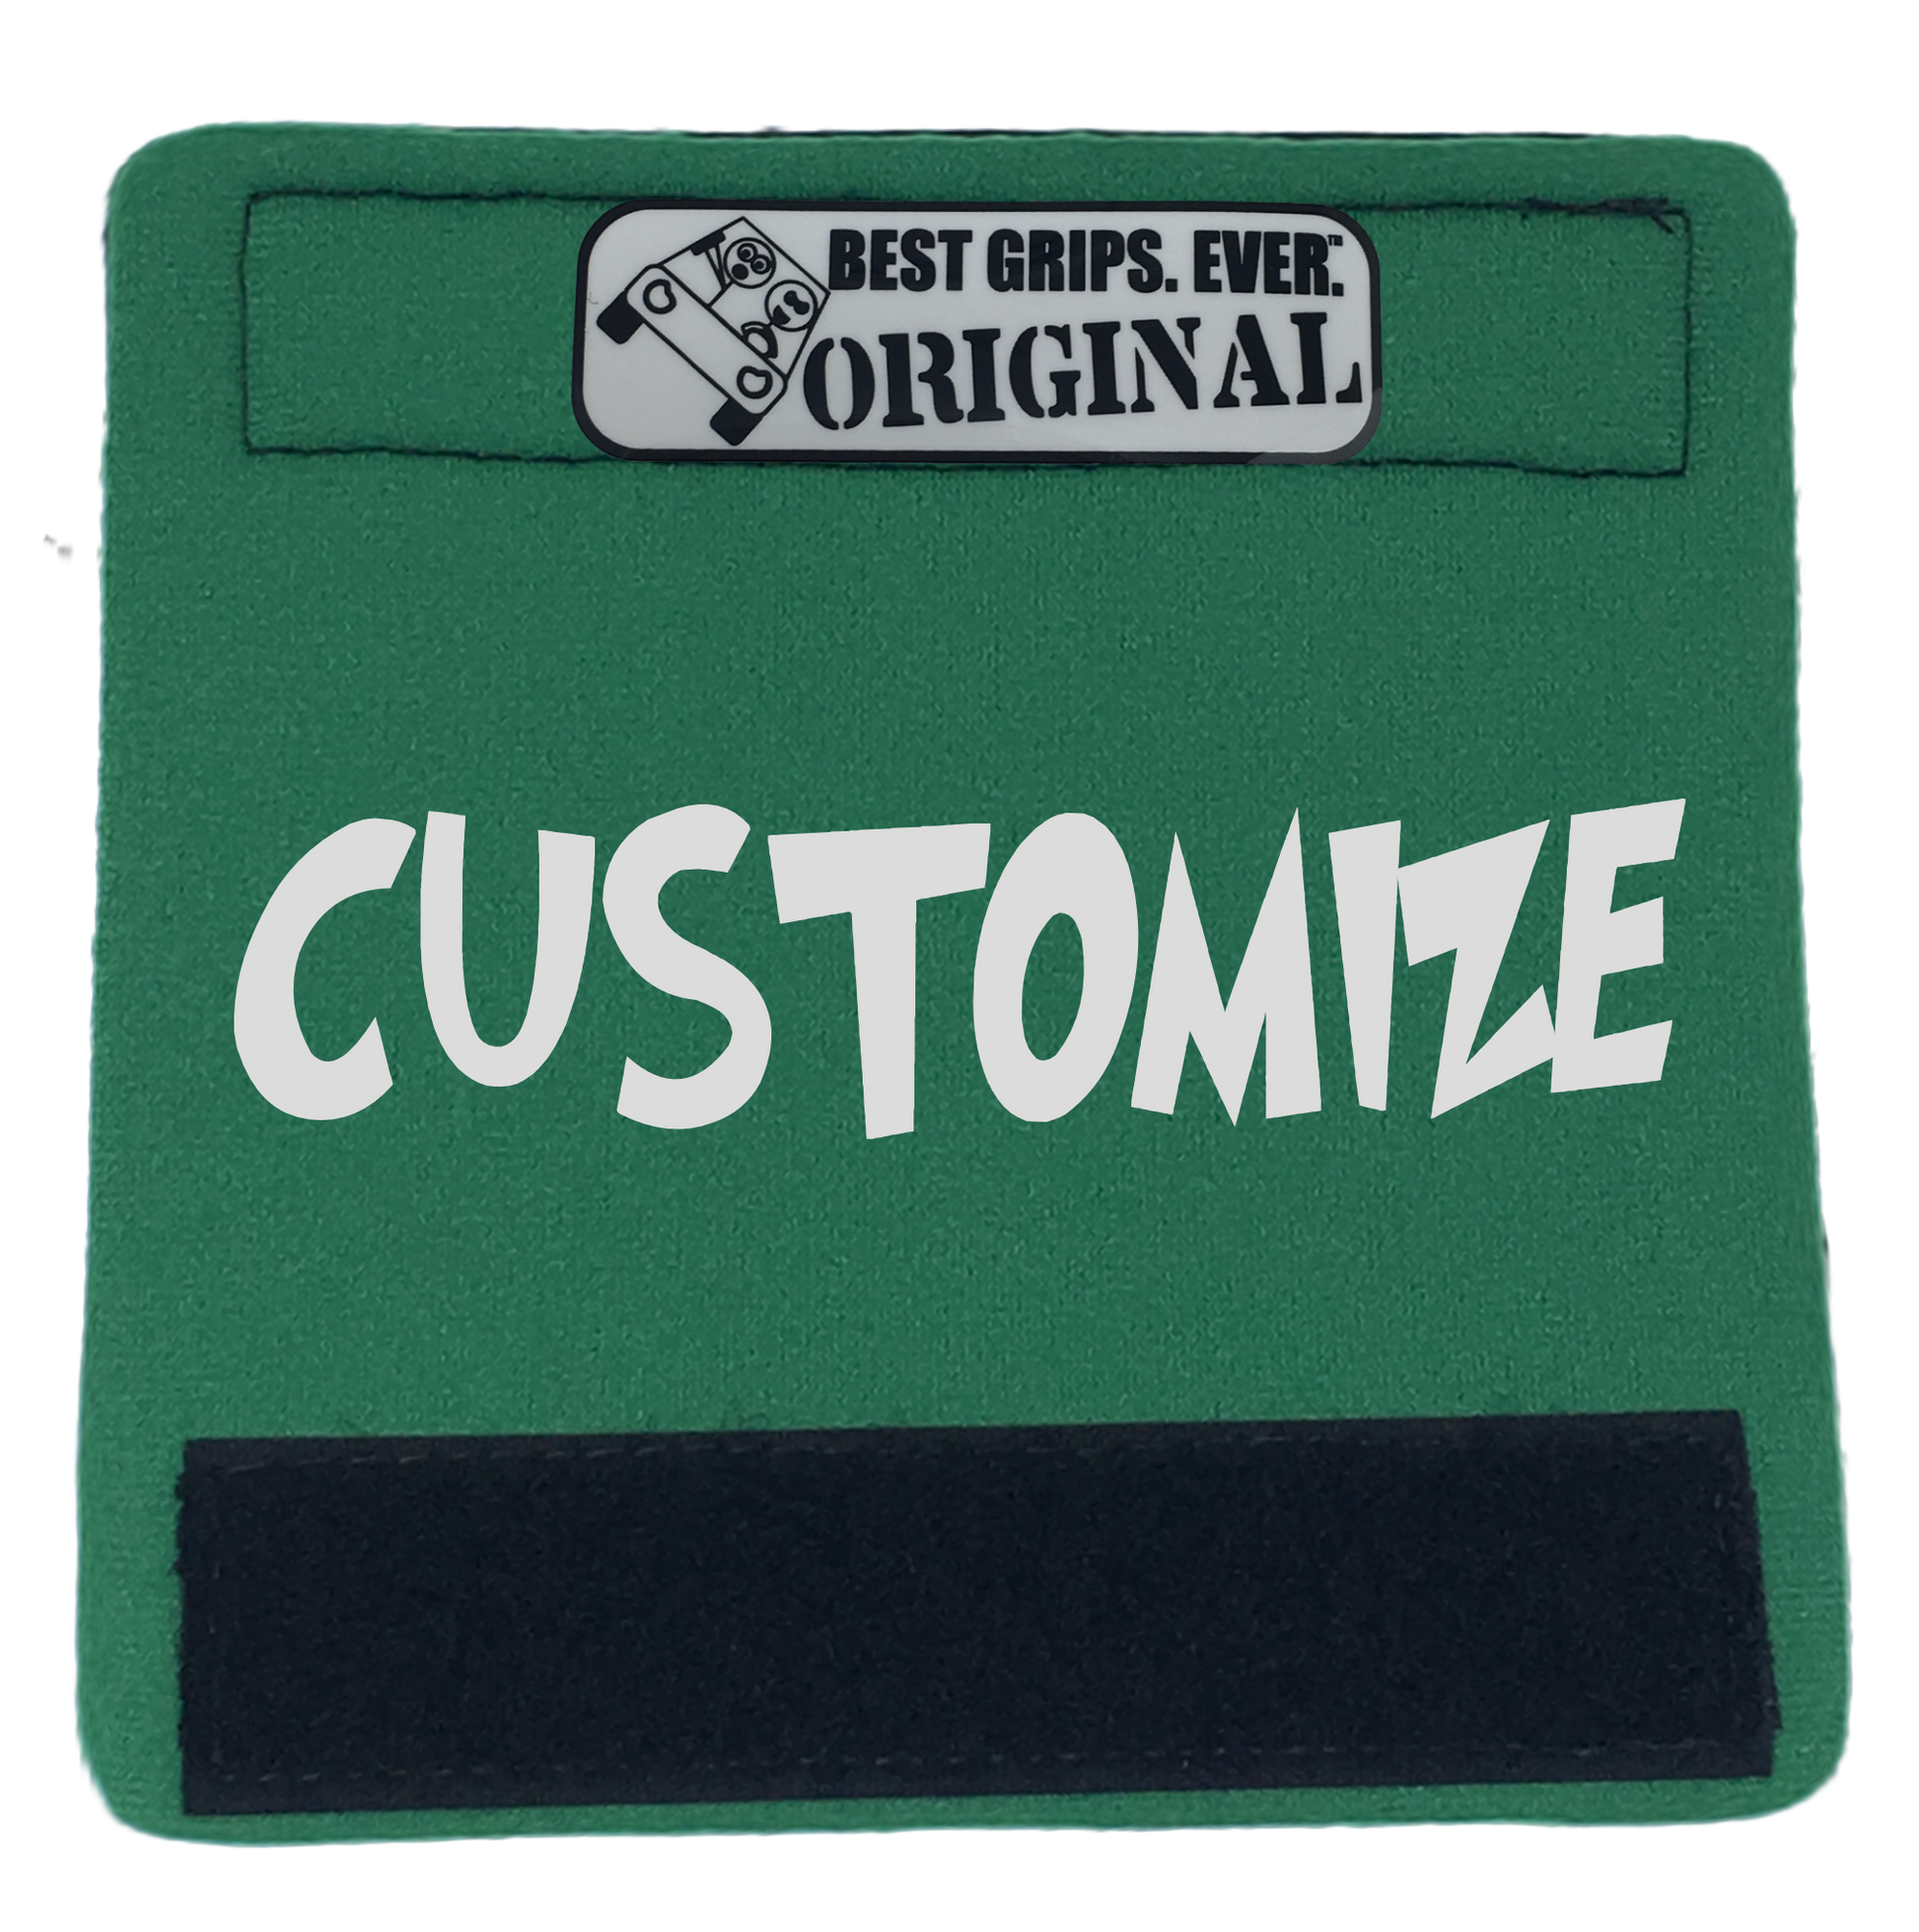 The Custom Grip. (1 Color) - BEST GRIPS. EVER.®